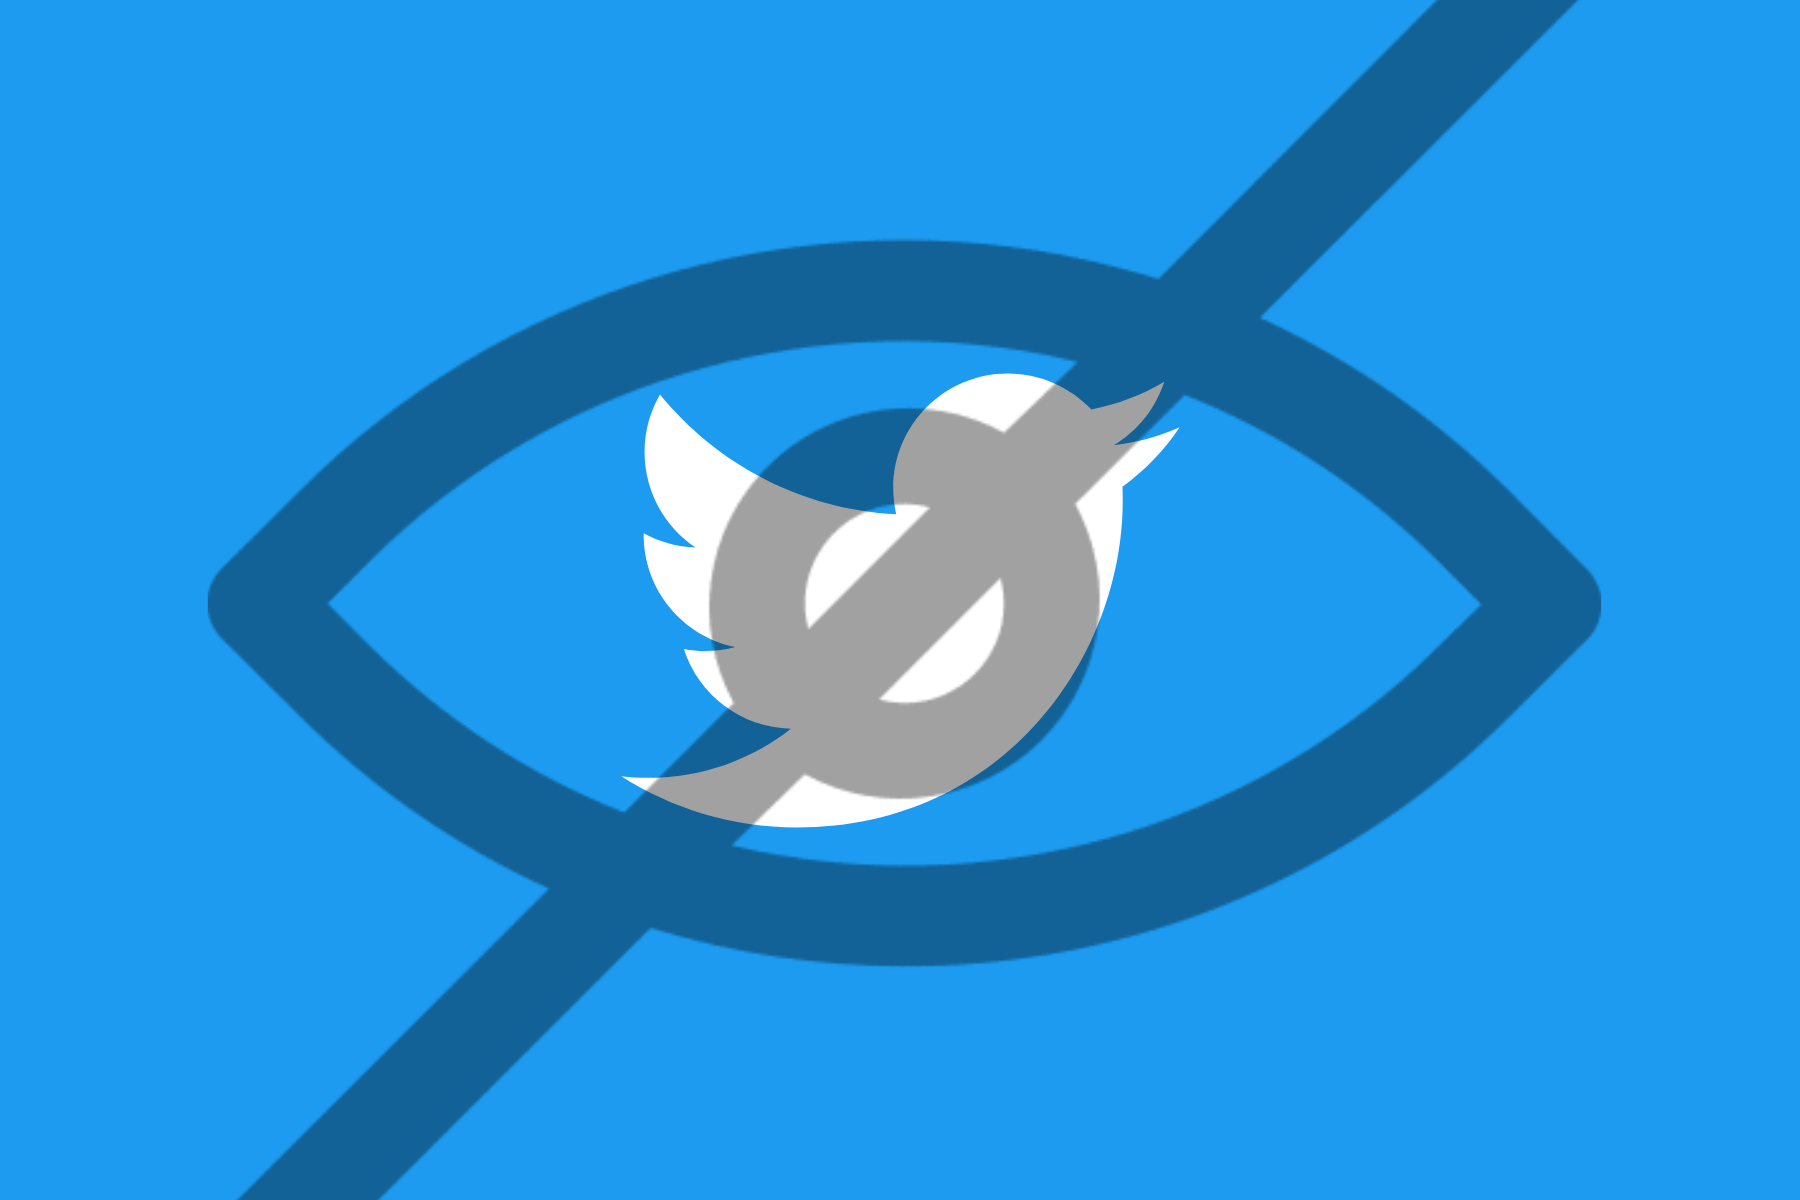 A Twitter logo with a sensitive and censored logo